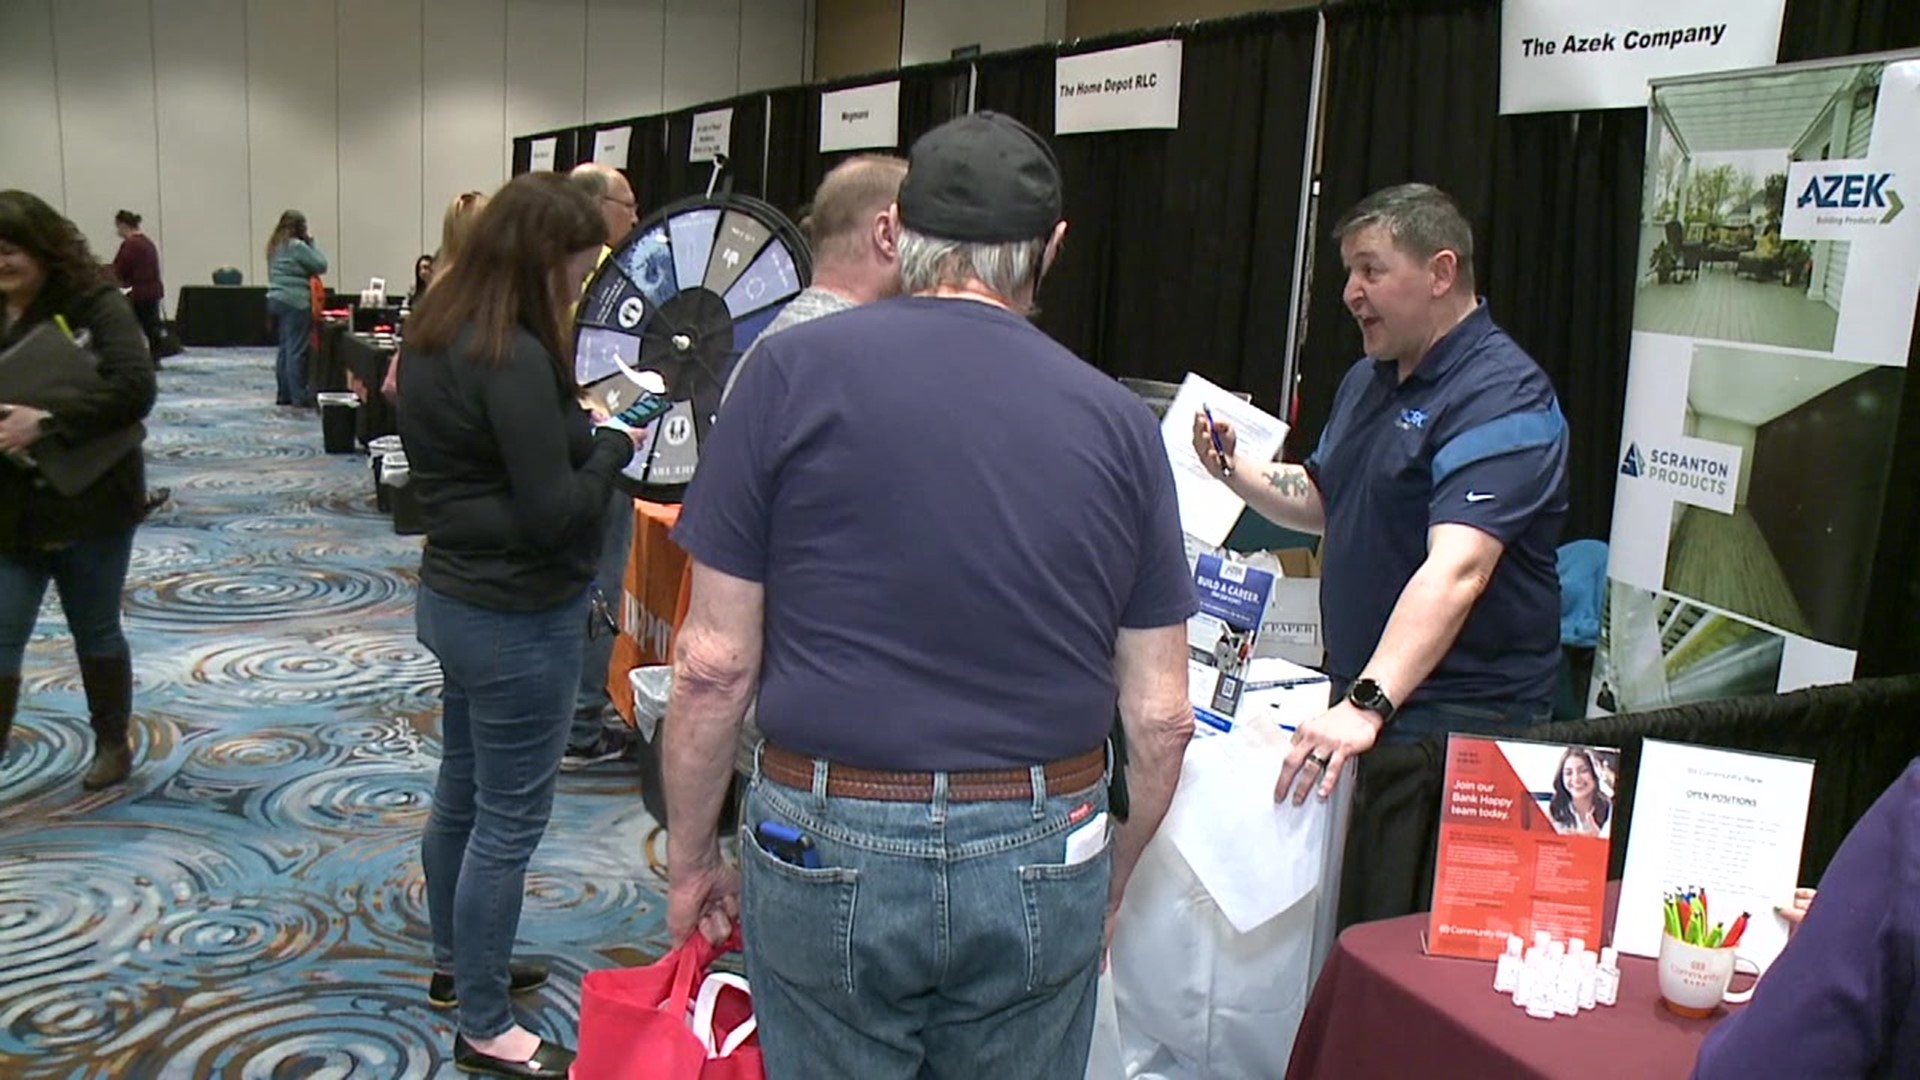 Organizers say this was the best-attended job fair since the pandemic when all events were held virtually.